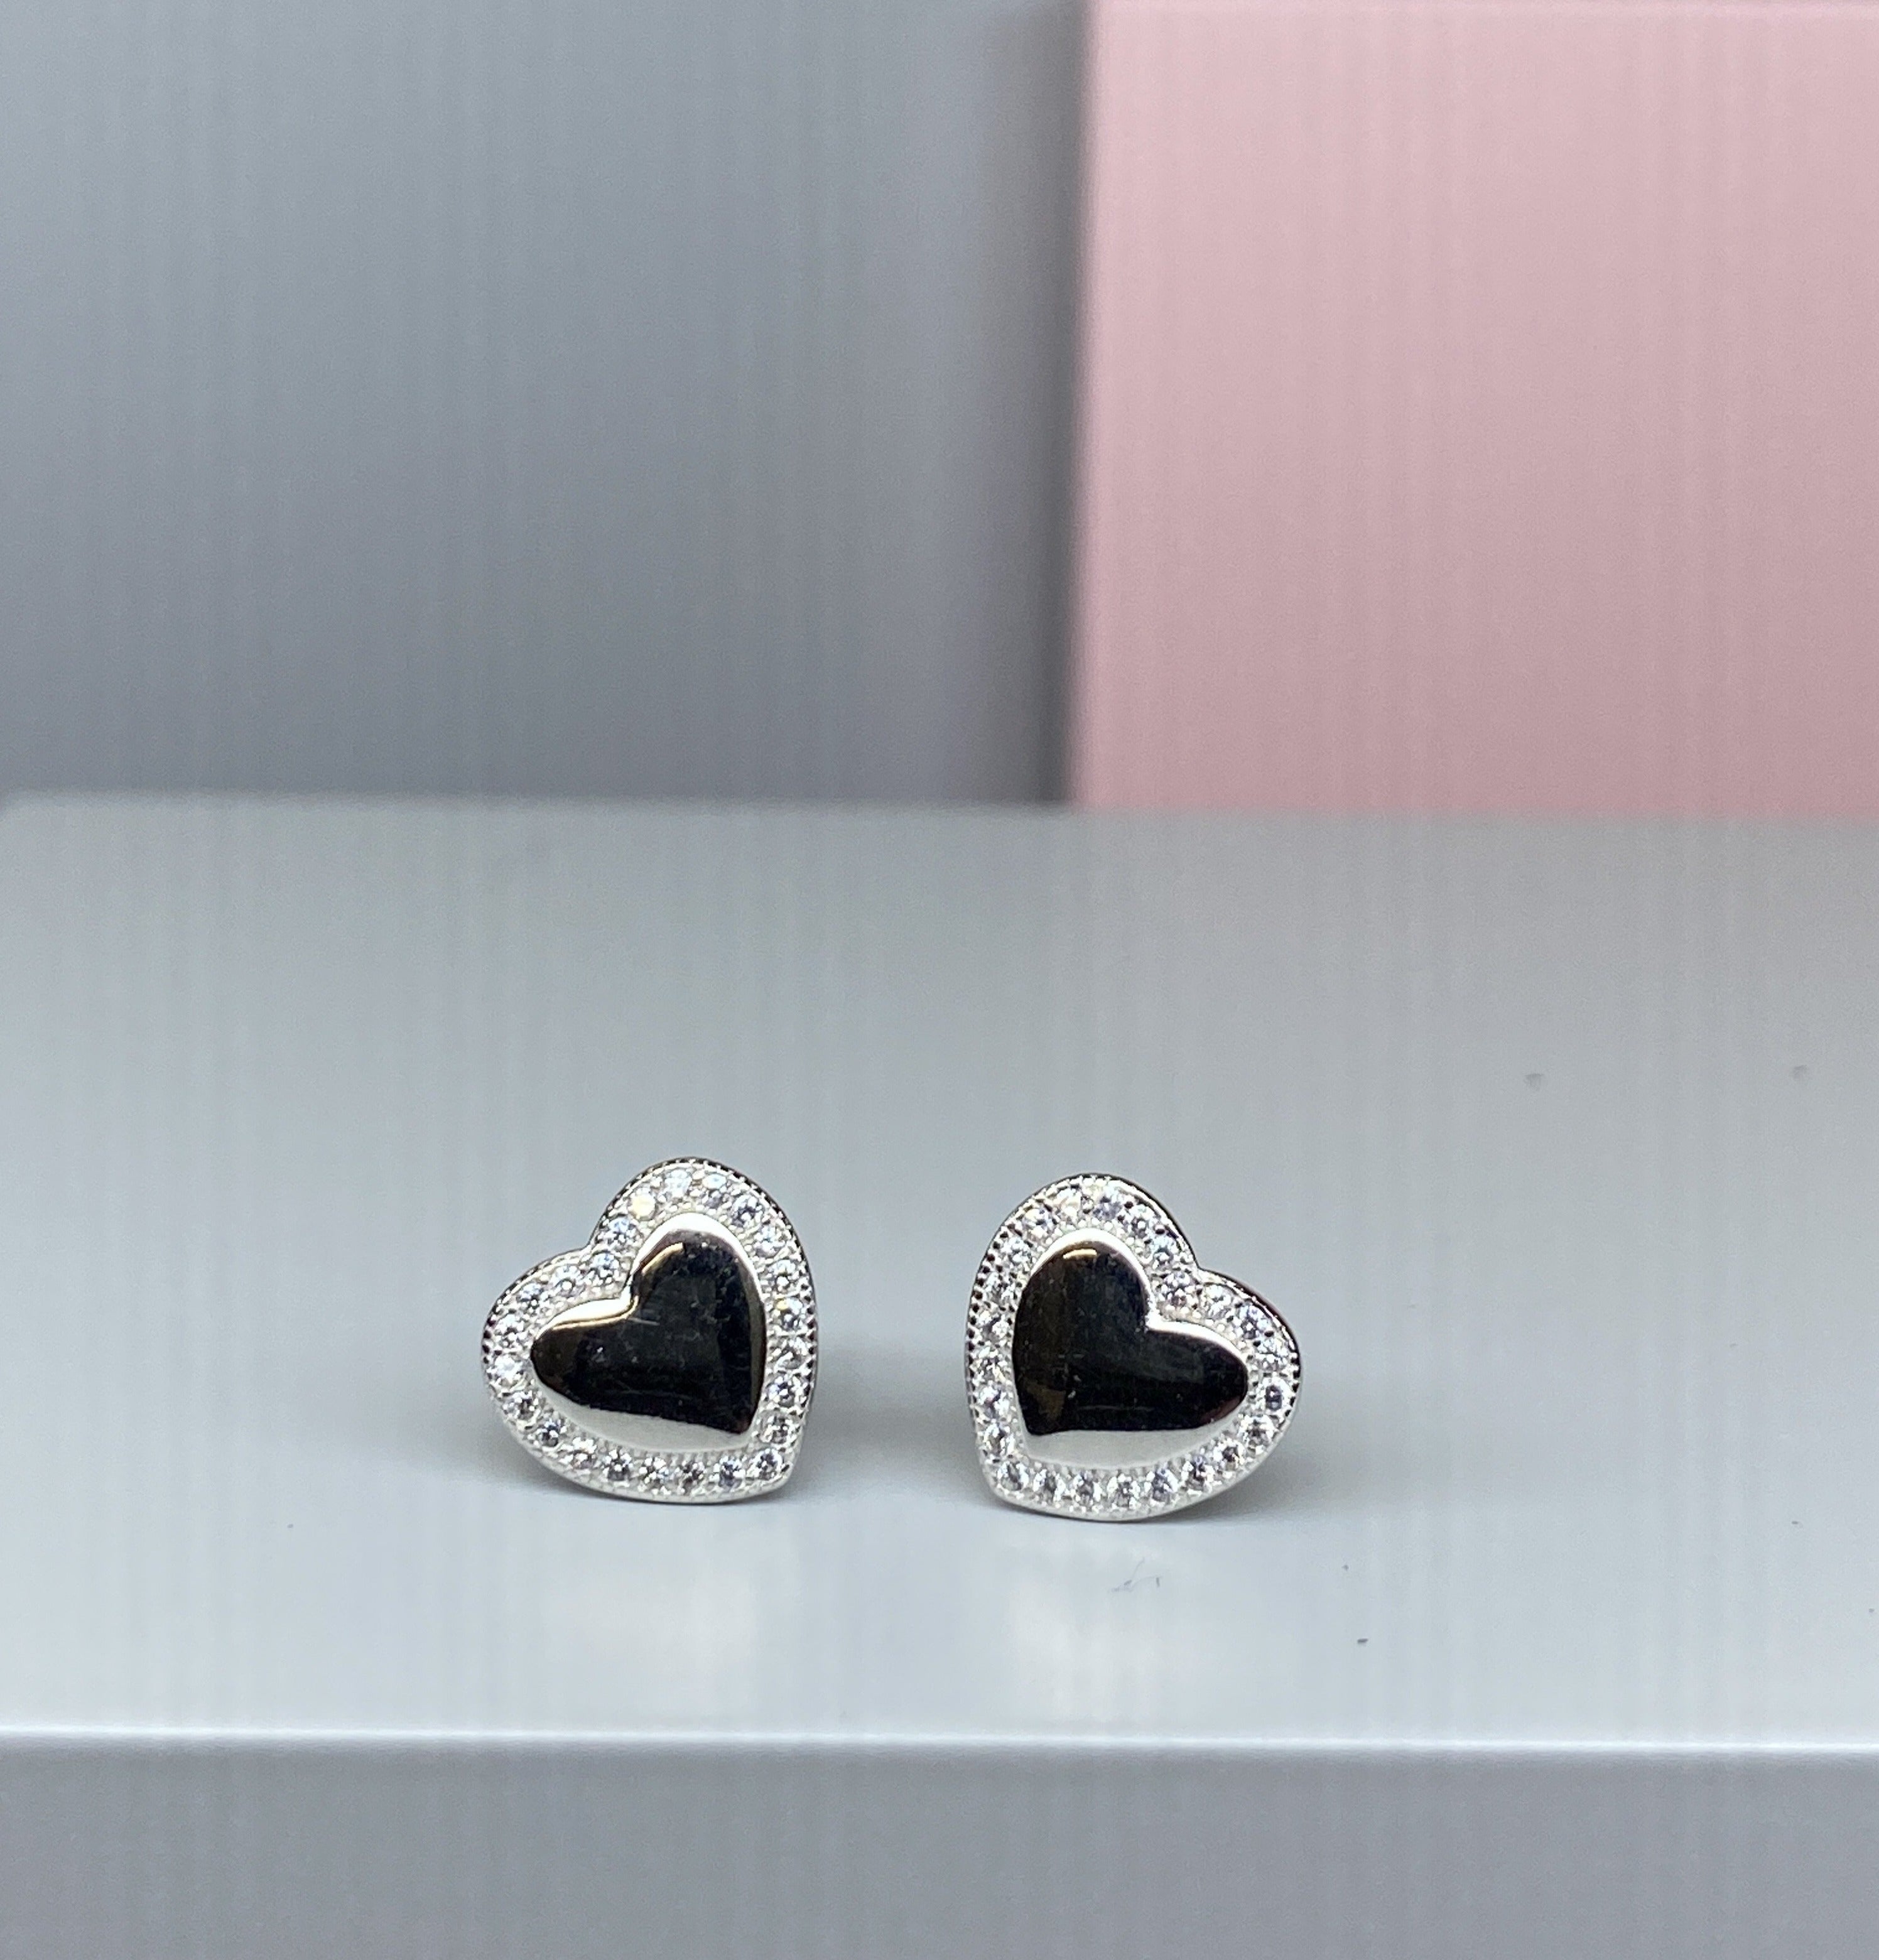 Sterling Silver Heart Stud Earrings - 10mm - Hallmark Jewellers Formby & The Jewellers Bench Widnes